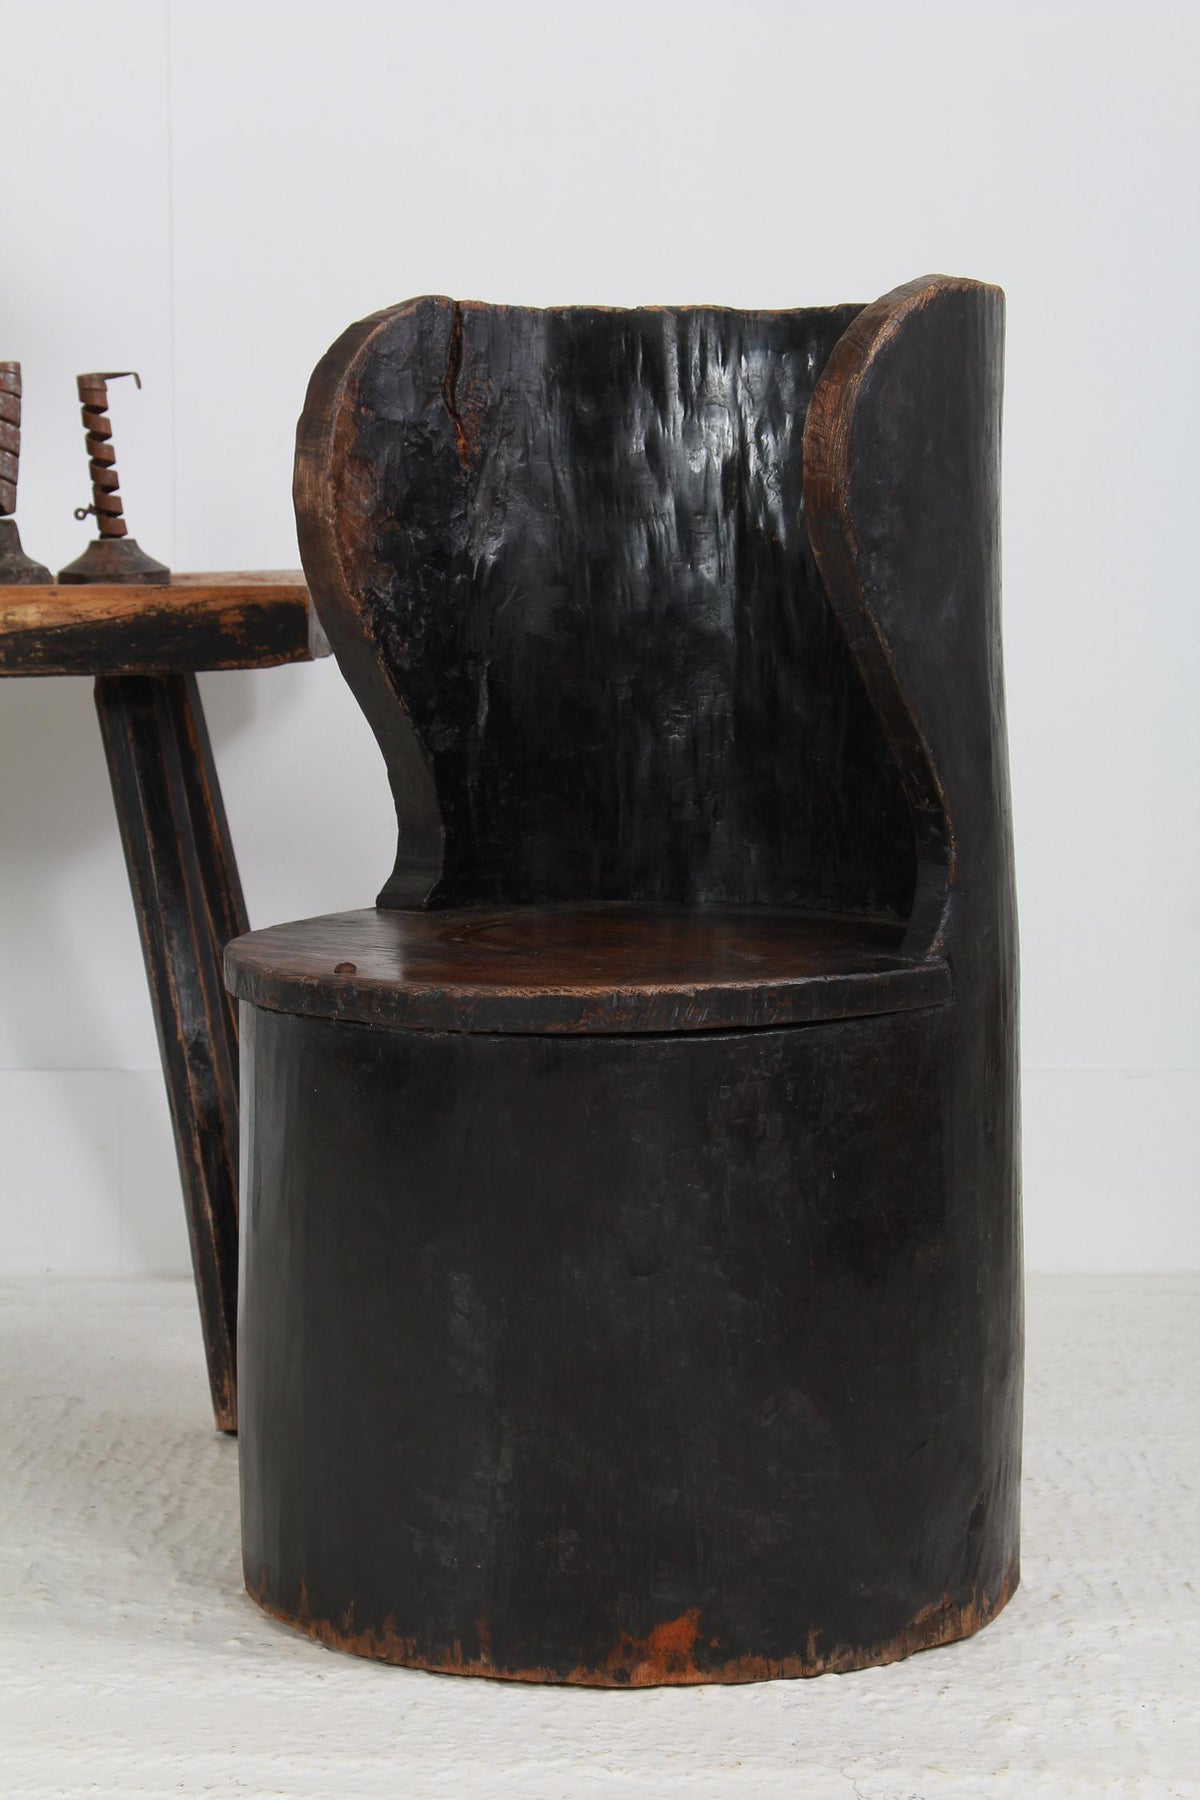 EARLY SWEDISH PRIMITIVE 18thC  DUG-OUT CHAIR